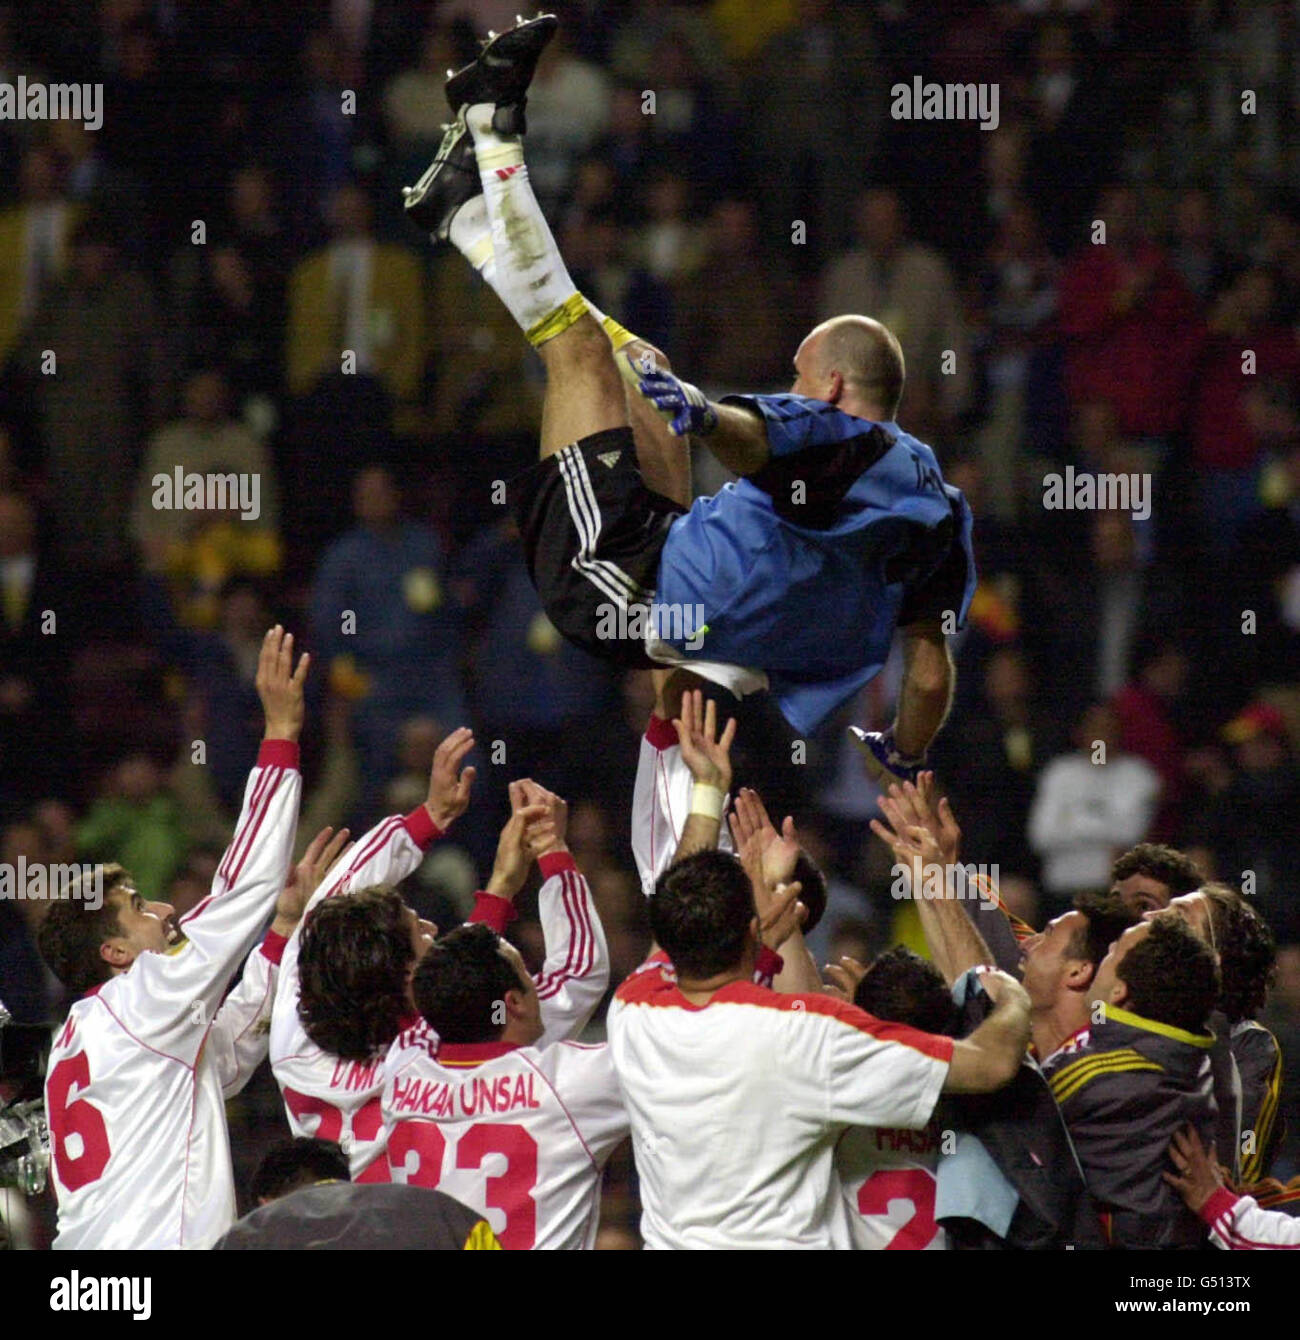 Galatasary goalkeeper Claudio Taffarel is thrown in the air after his team won the UEFA Cup against Arsenal after the penalty shoot-out at the Parken Stadium, Copenhagen. Final Score: Arsenal 0 Galatasaray 0 (0-0 aet, Galatasaray won 4-1 on penalties). Stock Photo